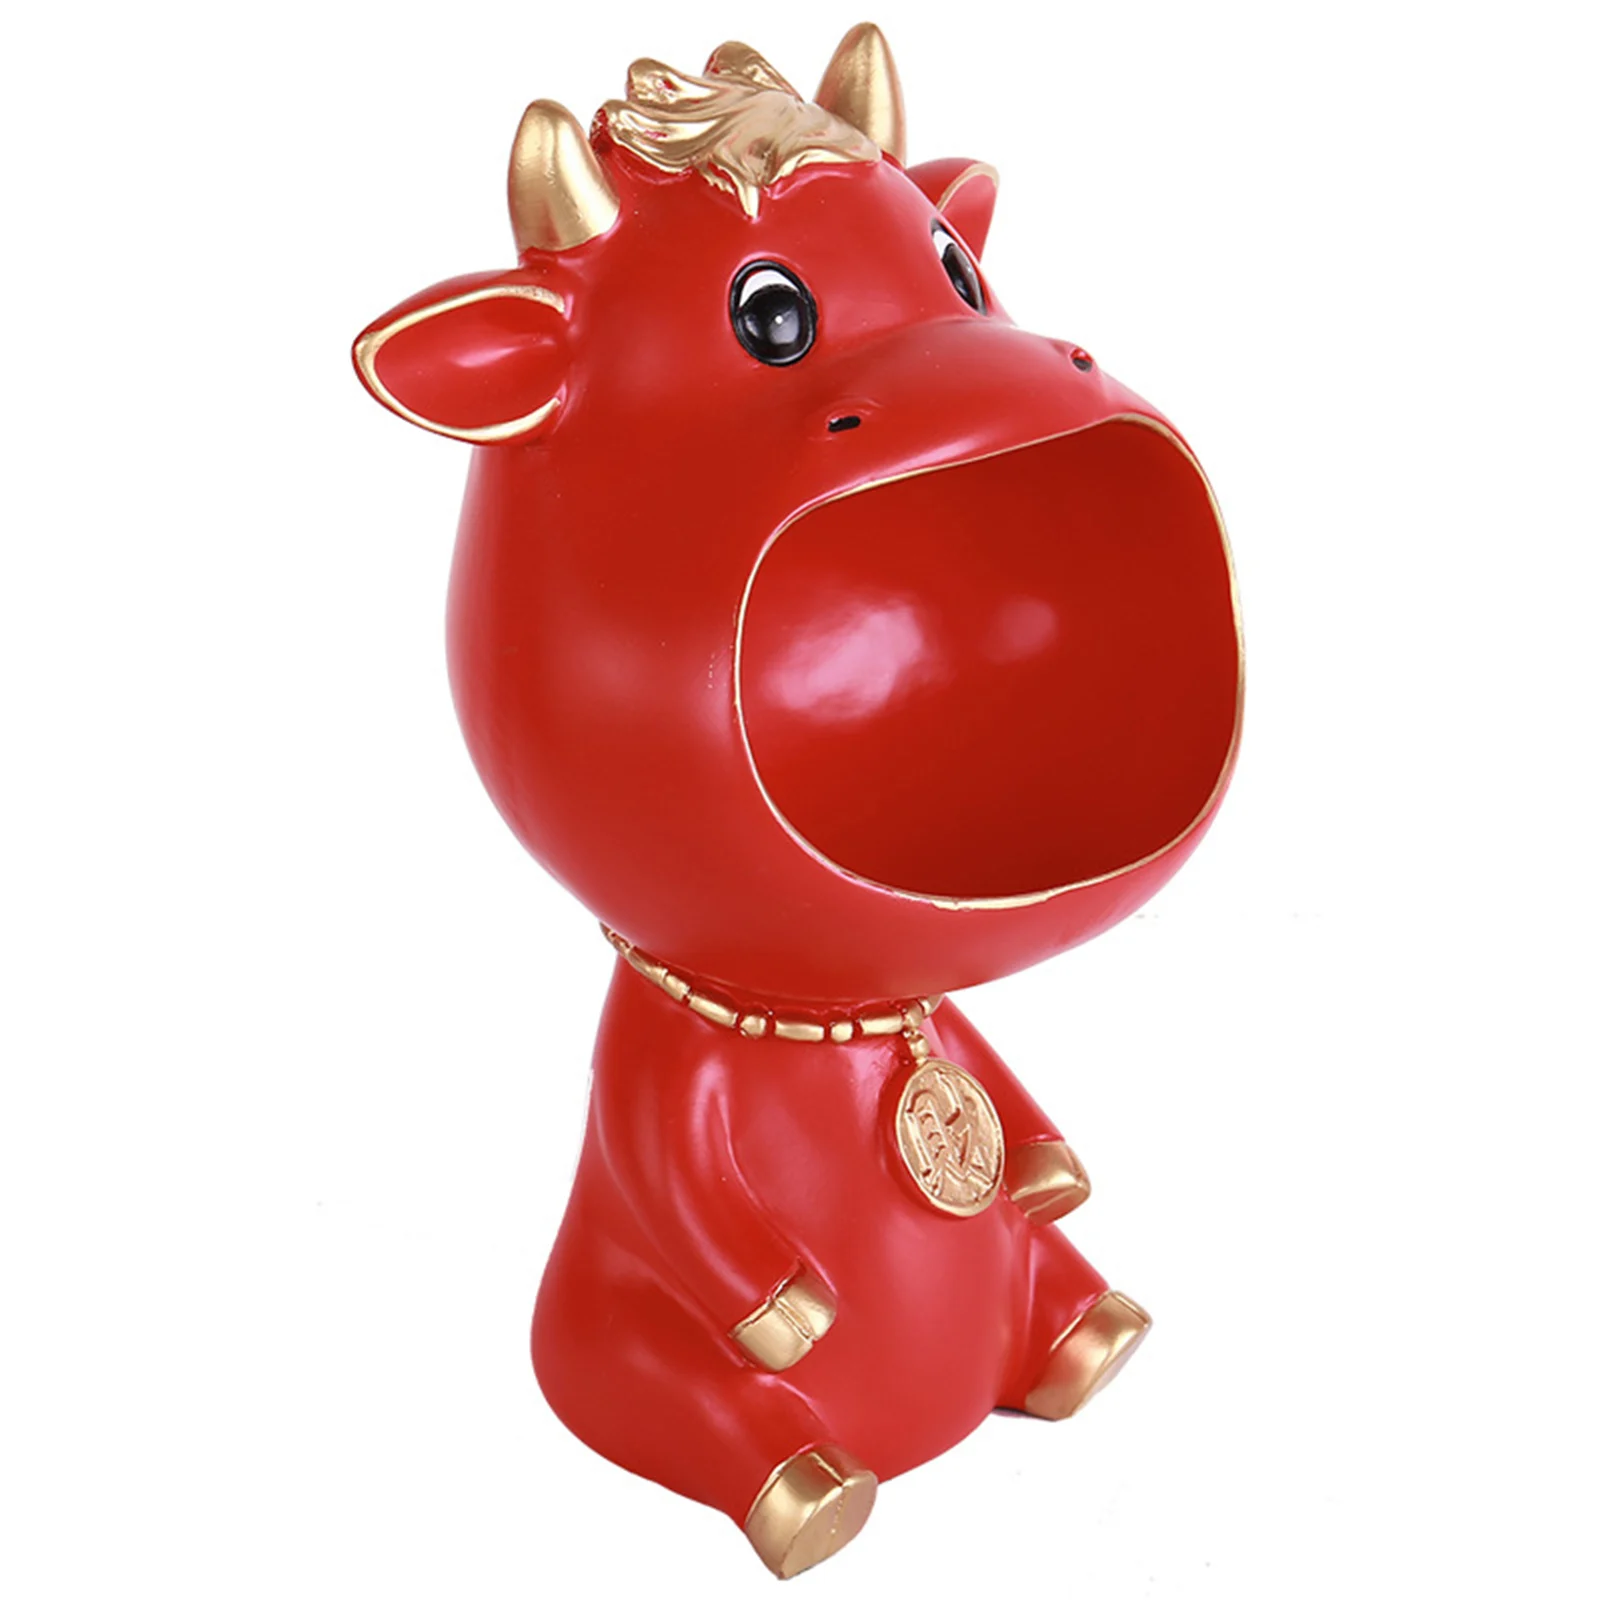 2021 Nordic Lucky Cow Multifunctional Candy Storage Box Entrance Key Candy Tray Living Room Ornaments Wedding Gift LB88